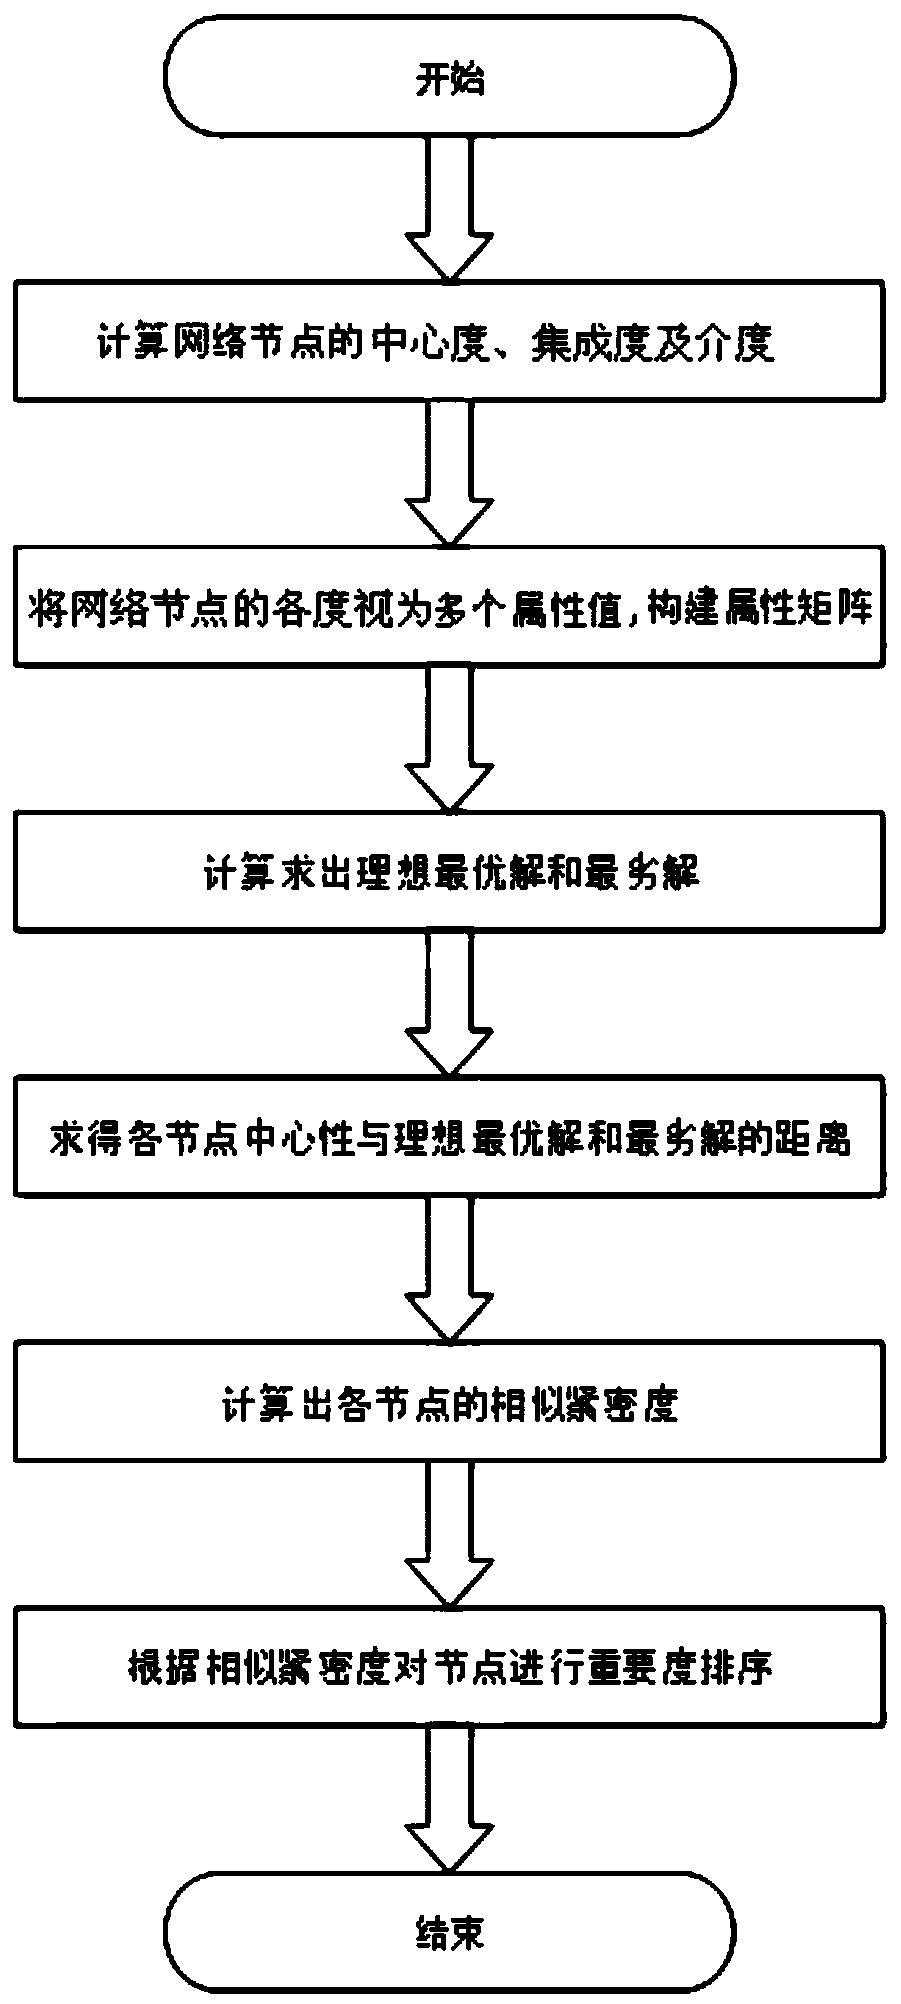 food tracing and query analysis system and method based on an HACCP system